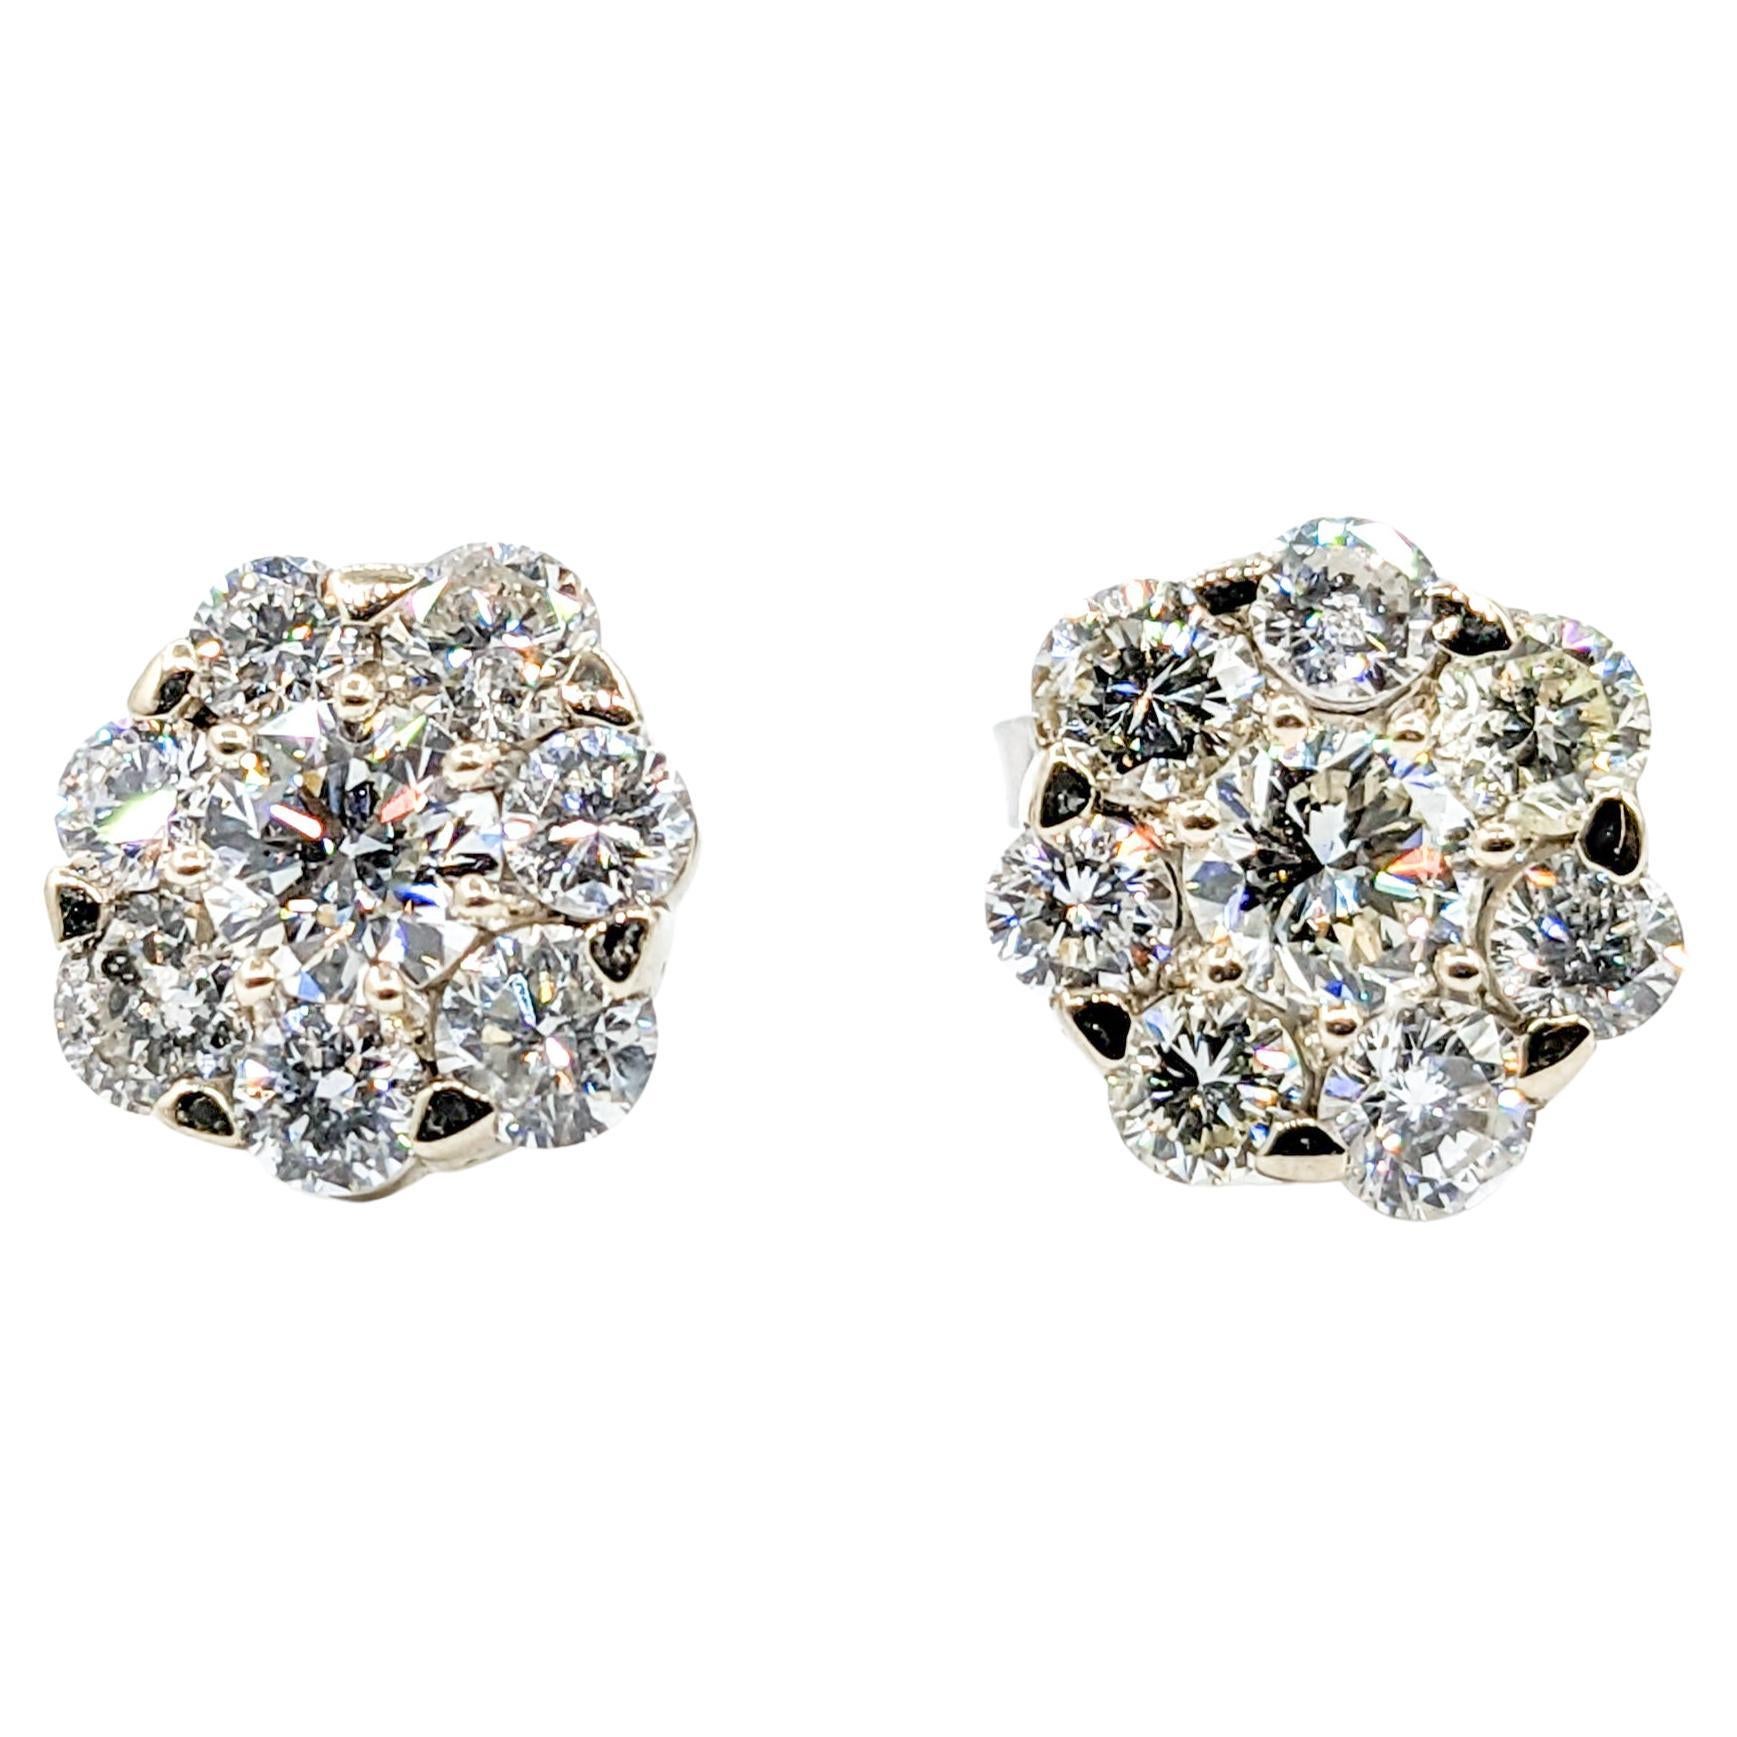 2.00ctw Diamond Cluster Stud Earrings in White Gold 

Discover elegance redefined with these exquisite earrings, masterfully crafted in 14kt white gold. Each earring showcases a stunning array of 2.00ctw round diamonds, brilliantly sparkling with SI